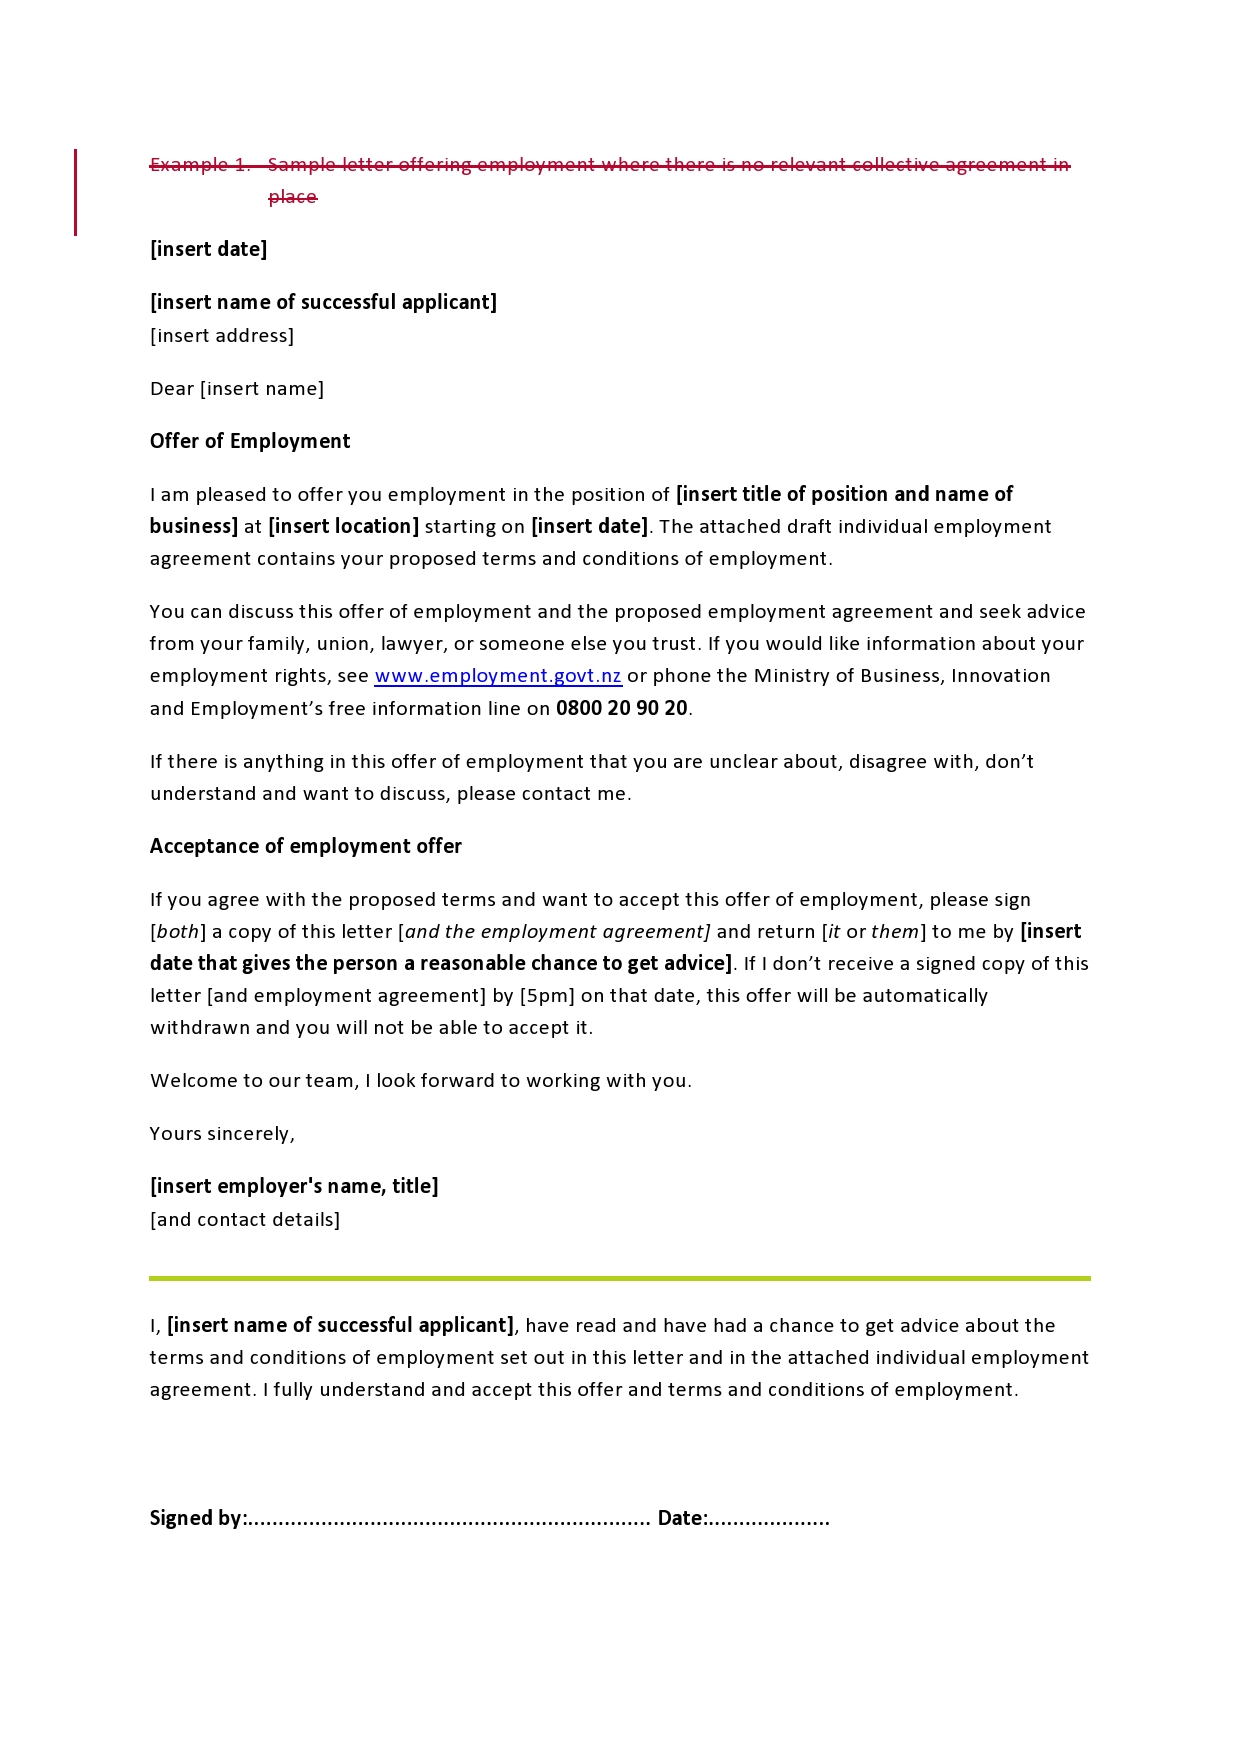 Free employment offer letter template 14